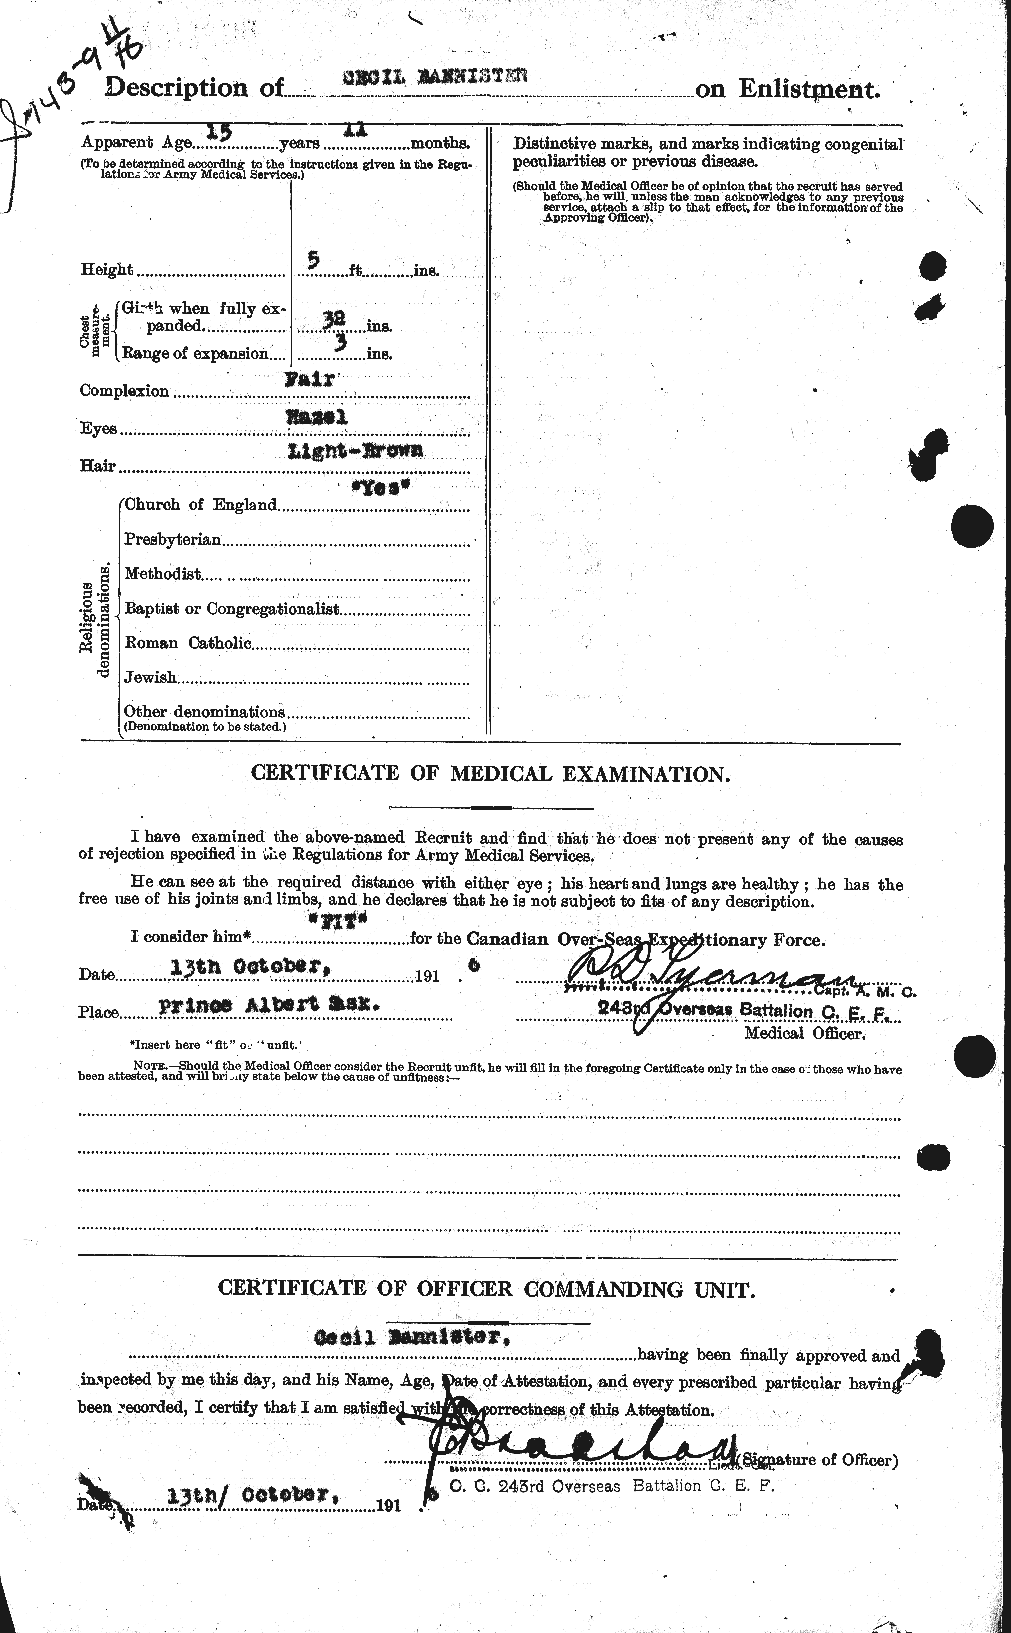 Personnel Records of the First World War - CEF 224811b